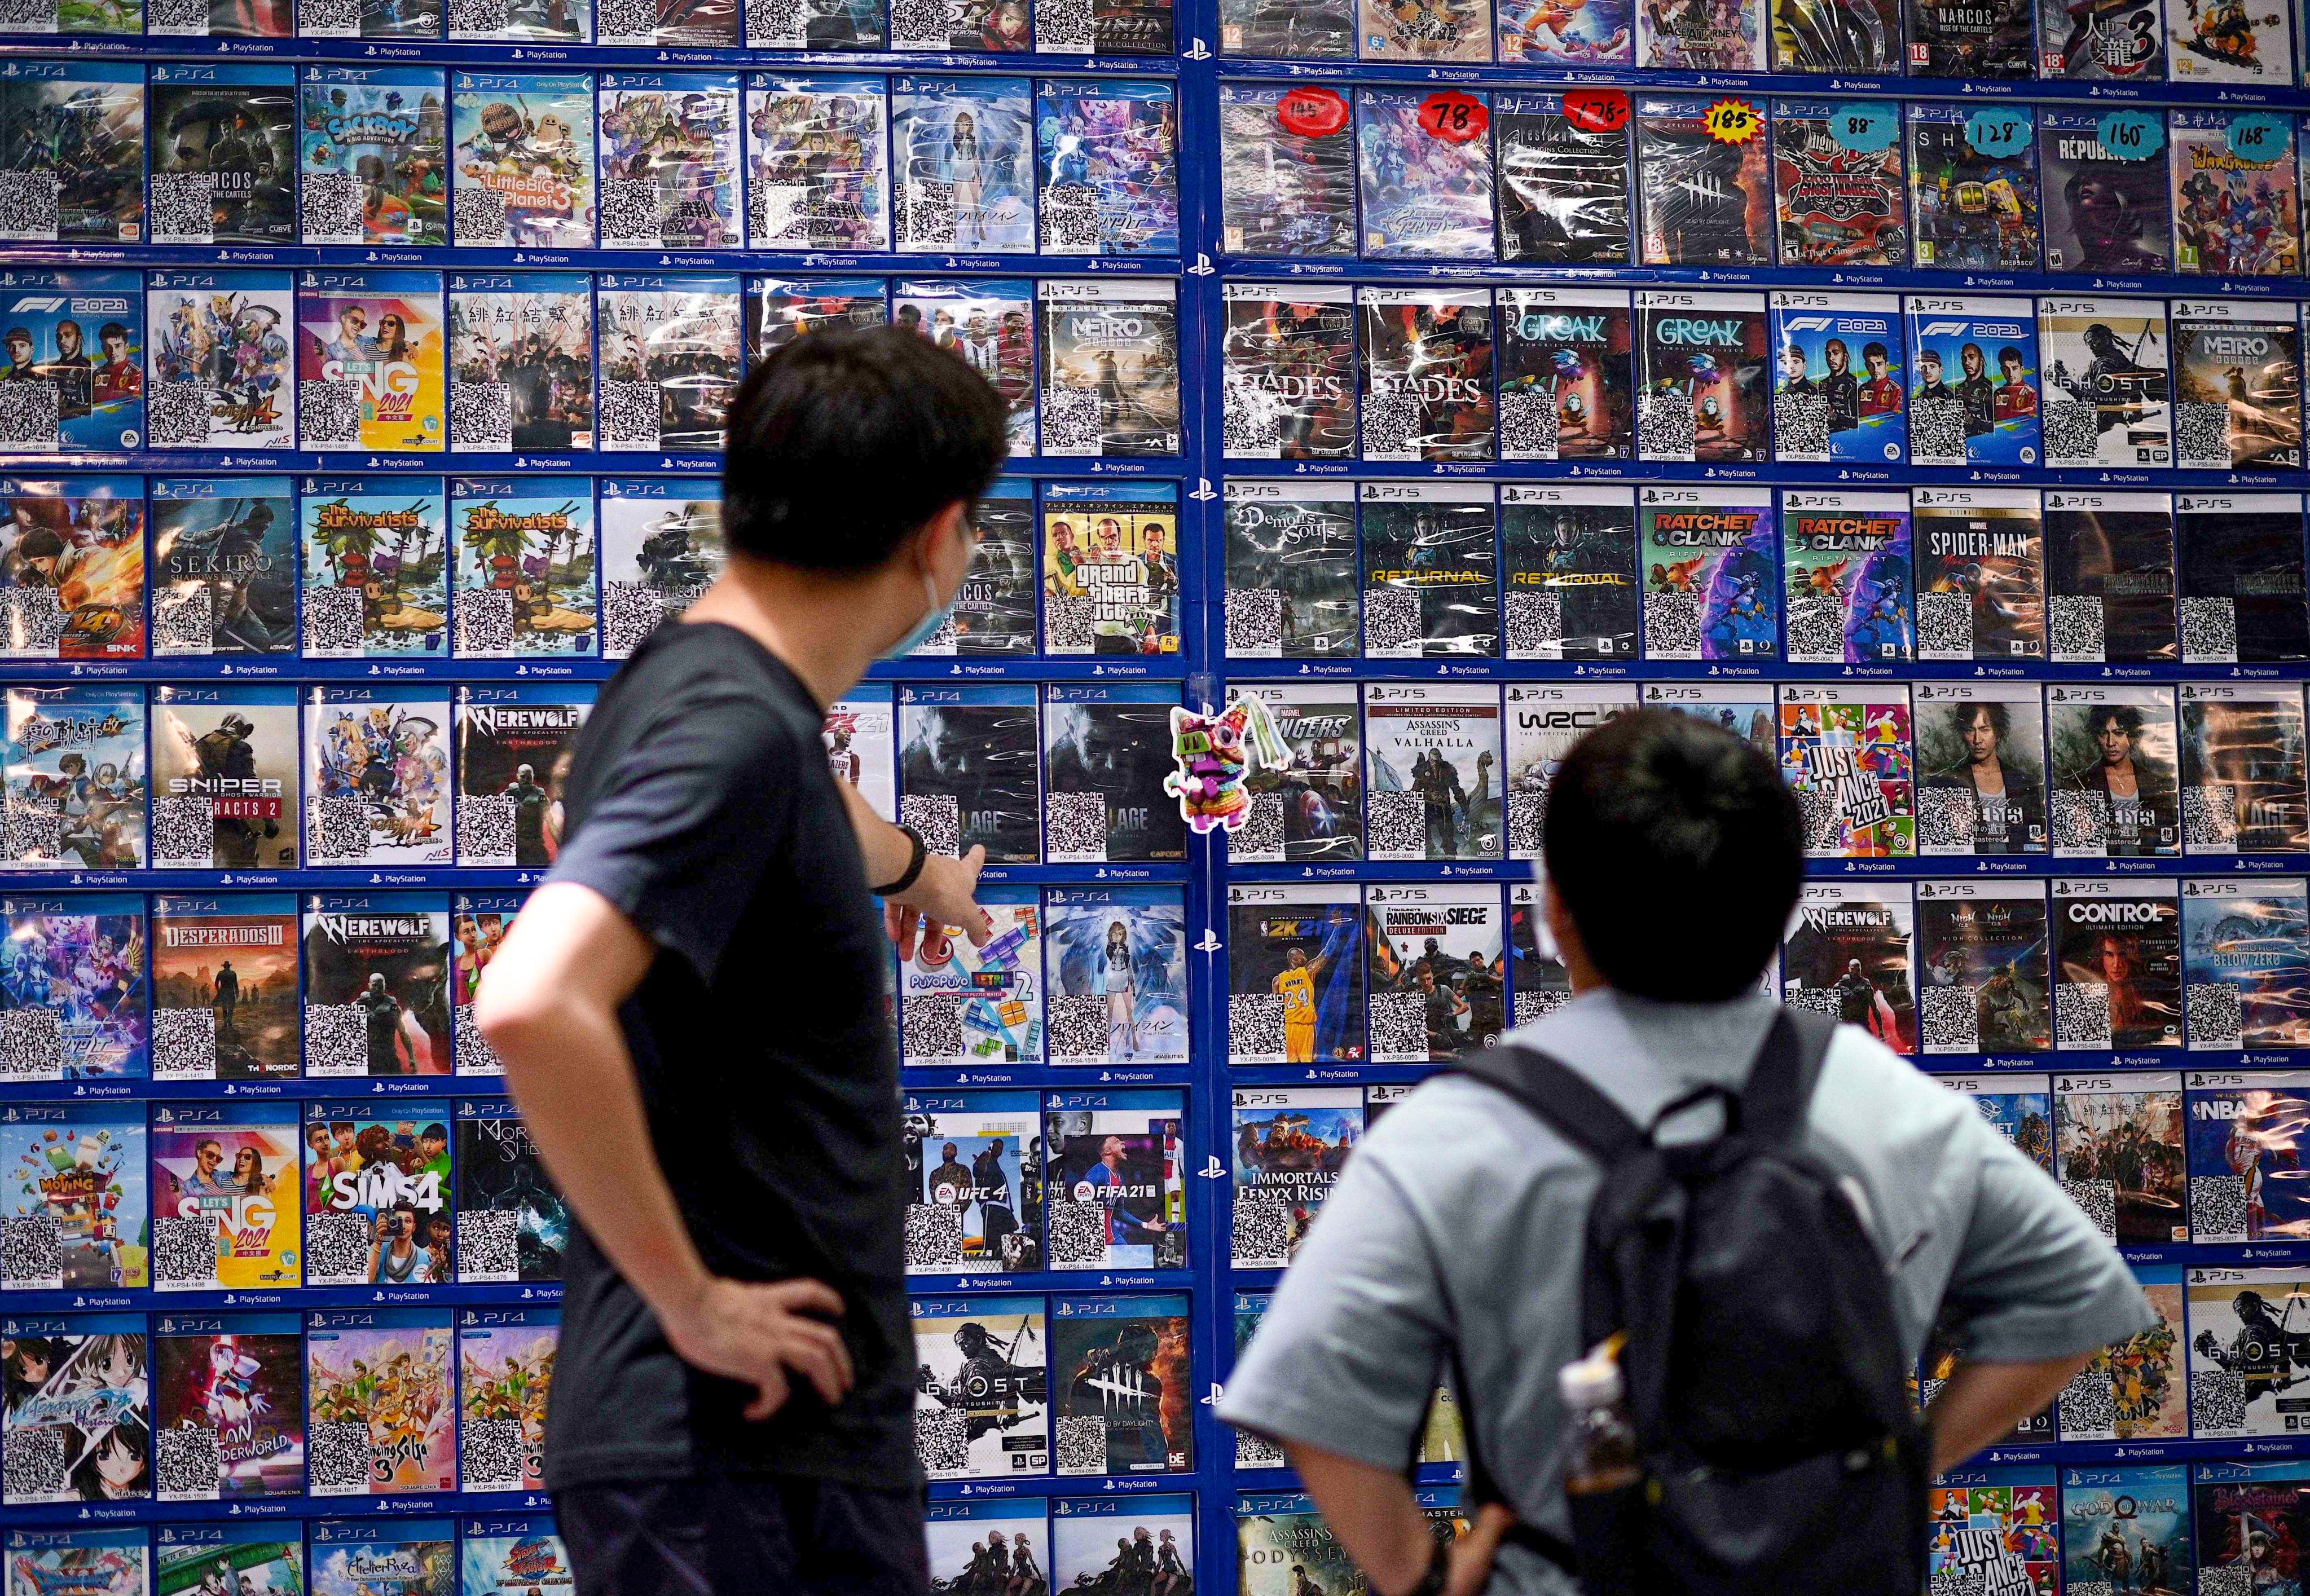 The slow resumption of game licensing in China has also stalled the release of new titles. Photo: AFP